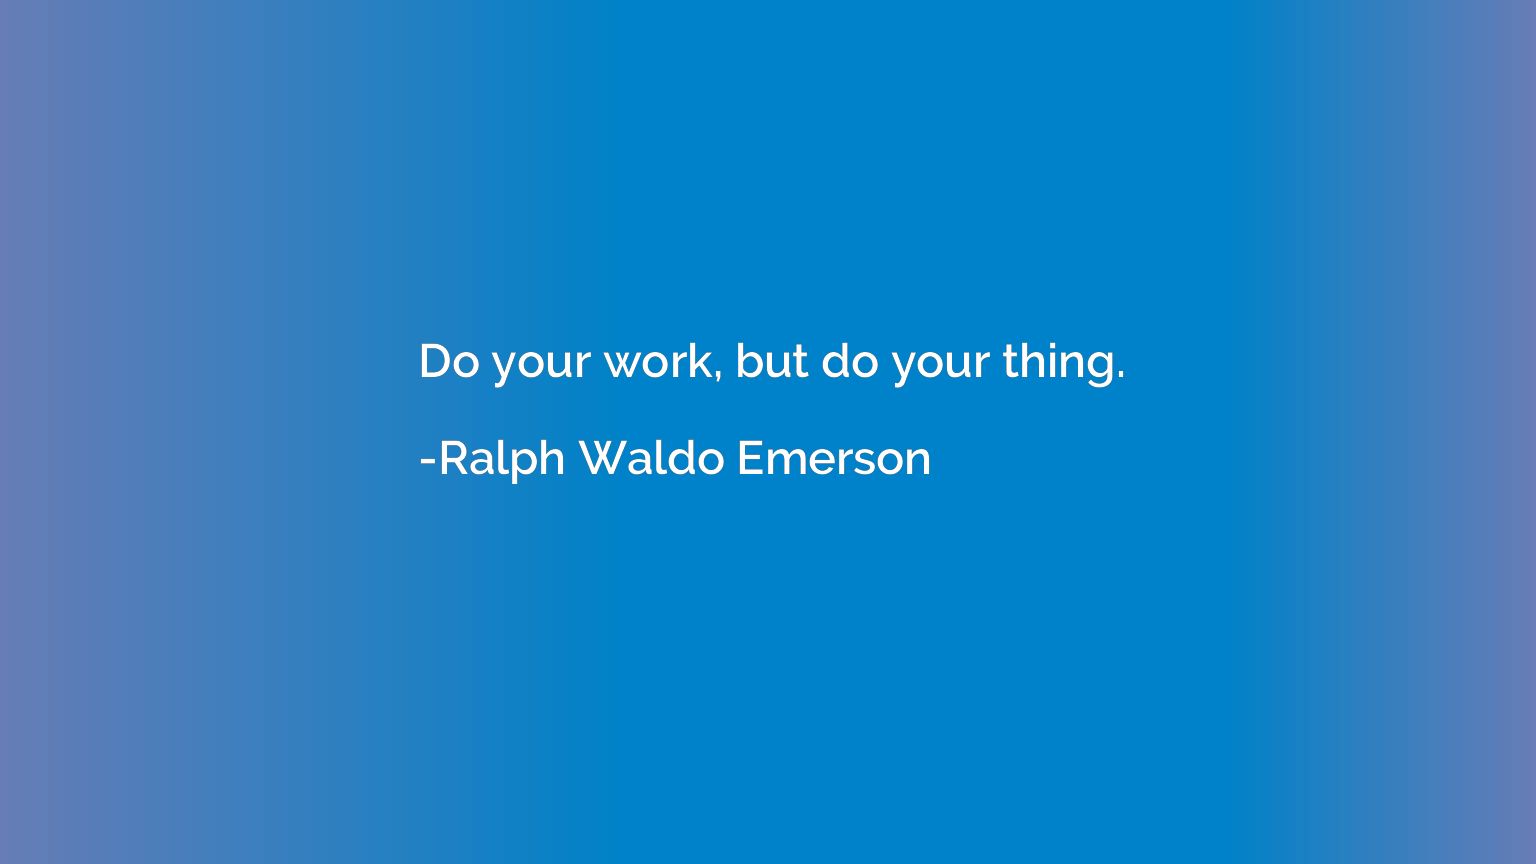 Do your work, but do your thing.